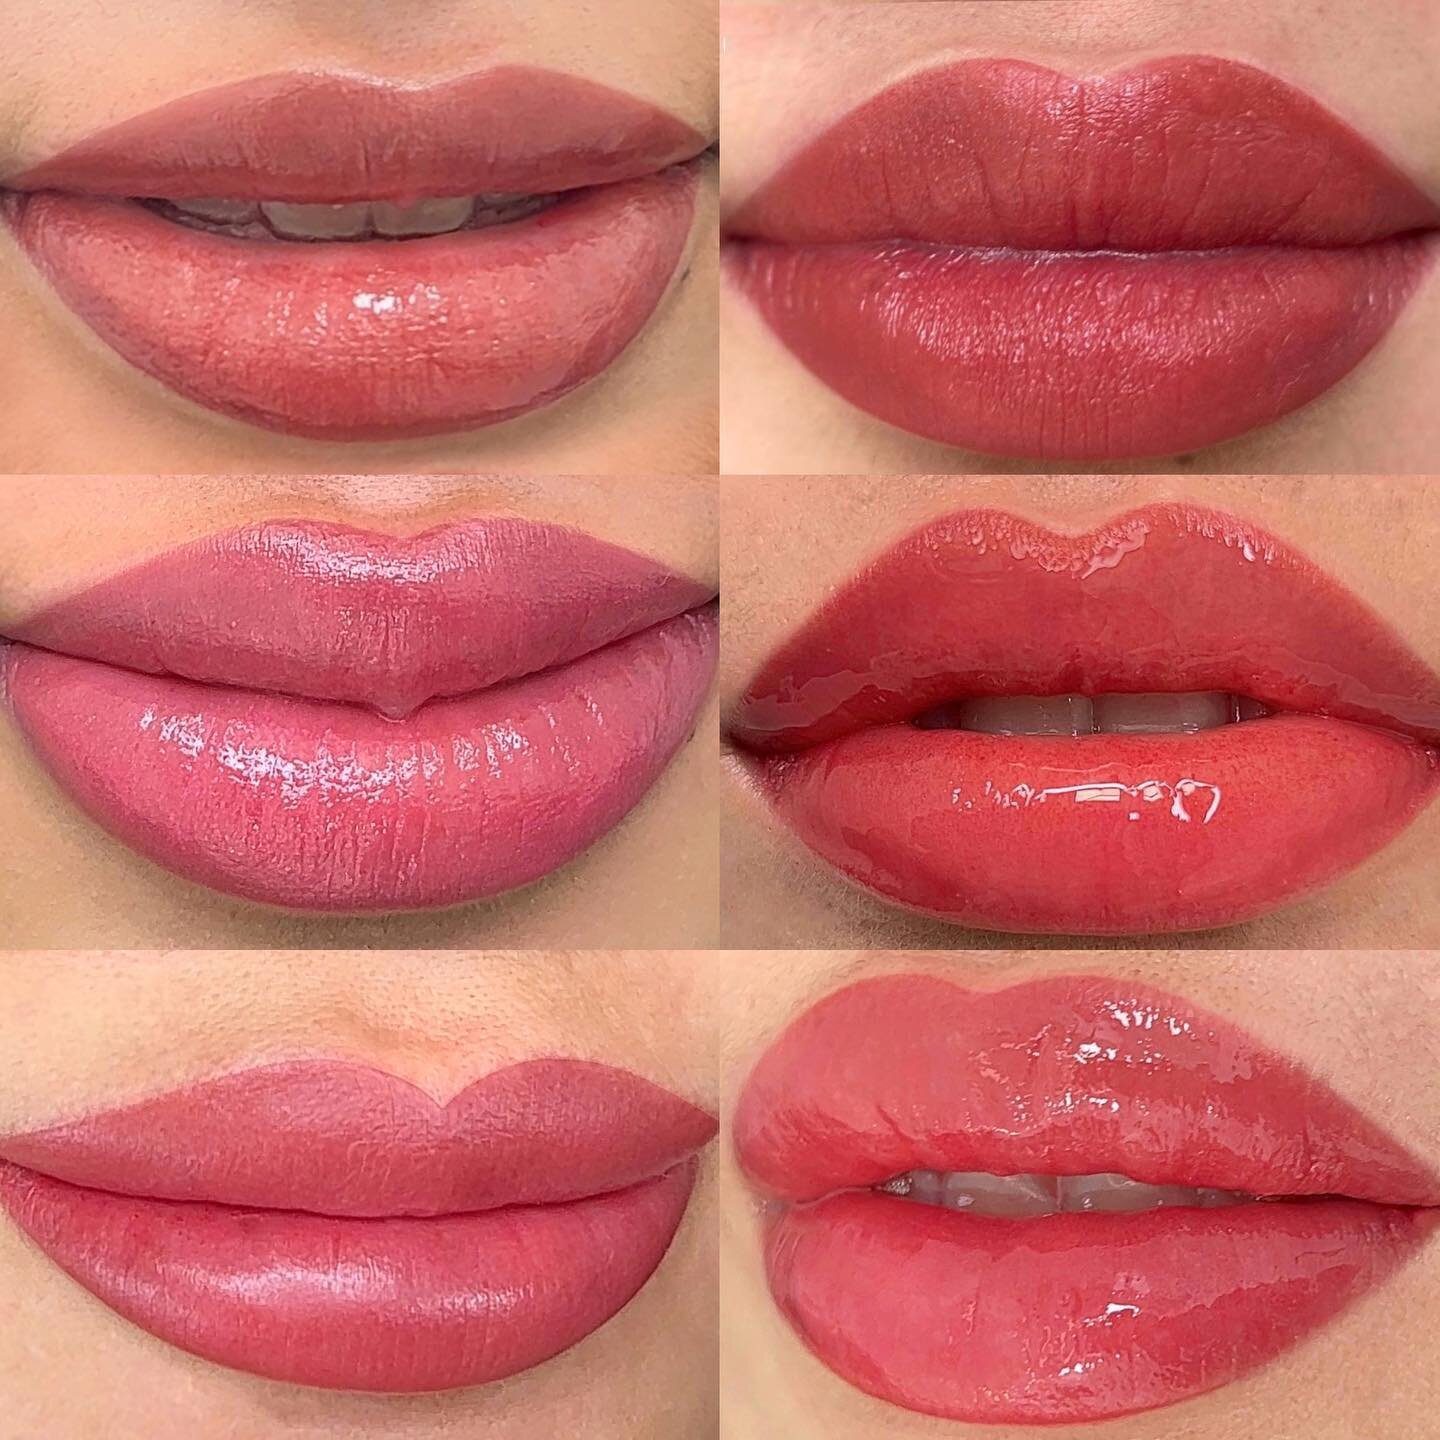 LIP BLUSH 👄
100% customizable shape and colour. We are able to create any desired colour. 

Which one is your favourite?

__________________________________________

𝘼𝙥𝙥𝙤𝙞𝙣𝙩𝙢𝙚𝙣𝙩 𝙩𝙞𝙢𝙚: 2.5 - 3 hours

𝙃𝙚𝙖𝙡𝙞𝙣𝙜 𝙩𝙞𝙢𝙚: 5 days, sw